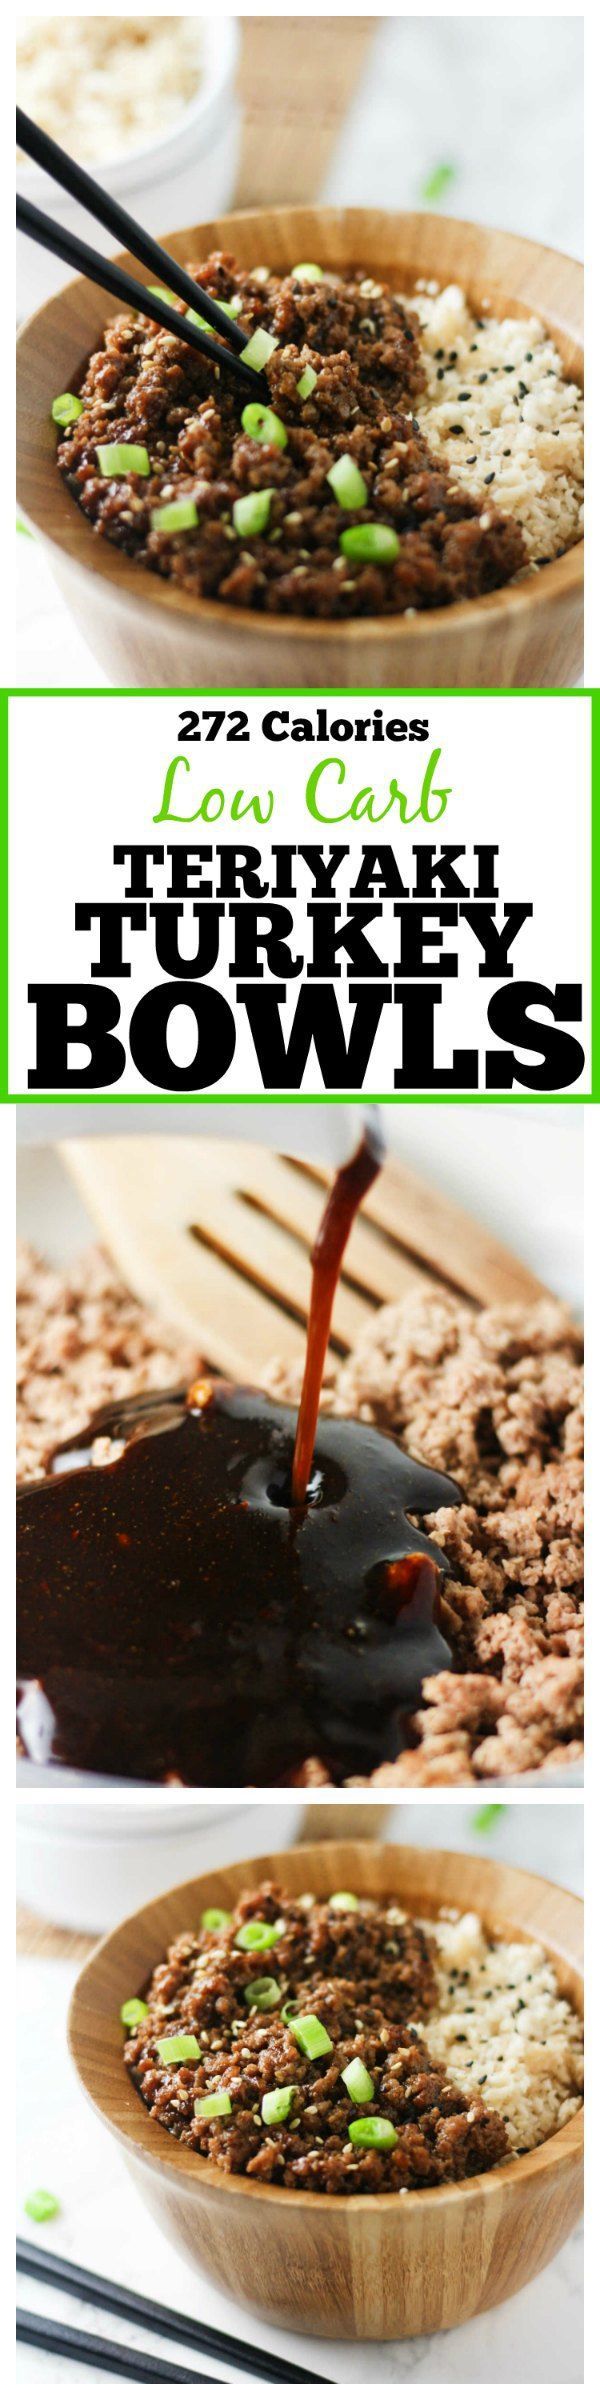 These delicious and easy Low Carb Teriyaki Turkey Bowls are ready in under 30 minutes and packed with tons of flavor!